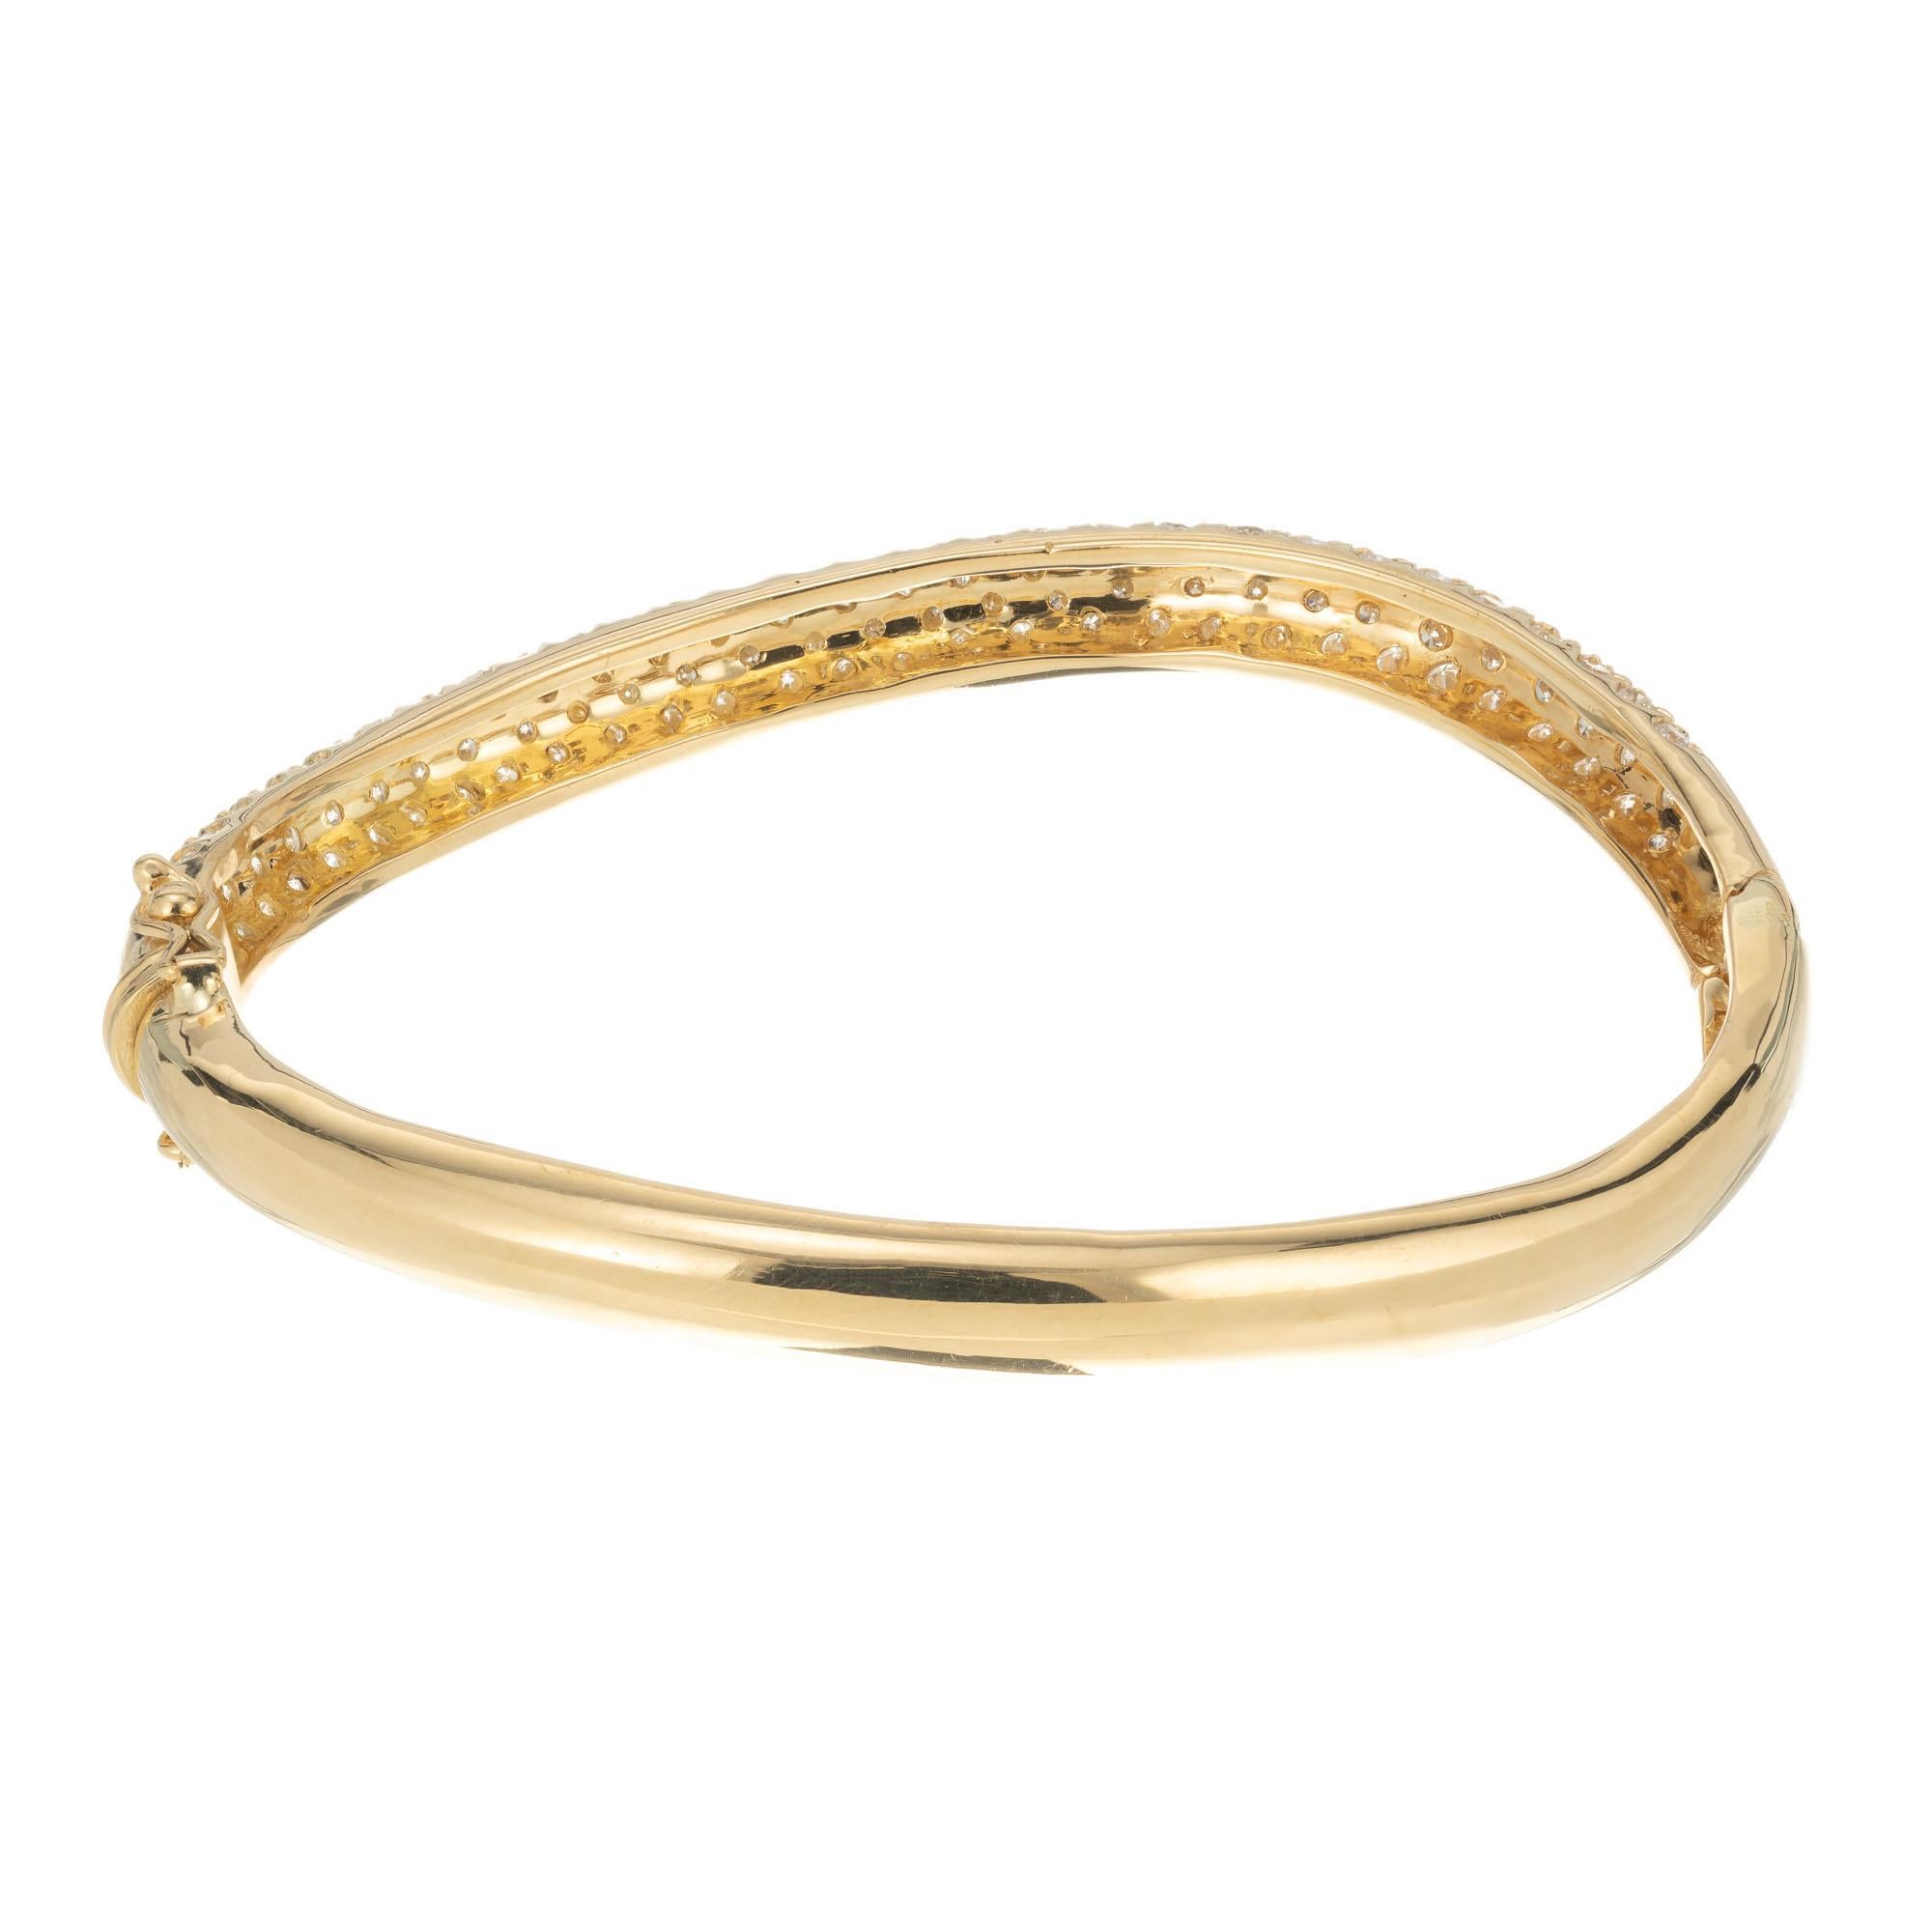 2.00 Carat Diamond Yellow Gold Swirl Bangle Bracelet In Good Condition For Sale In Stamford, CT